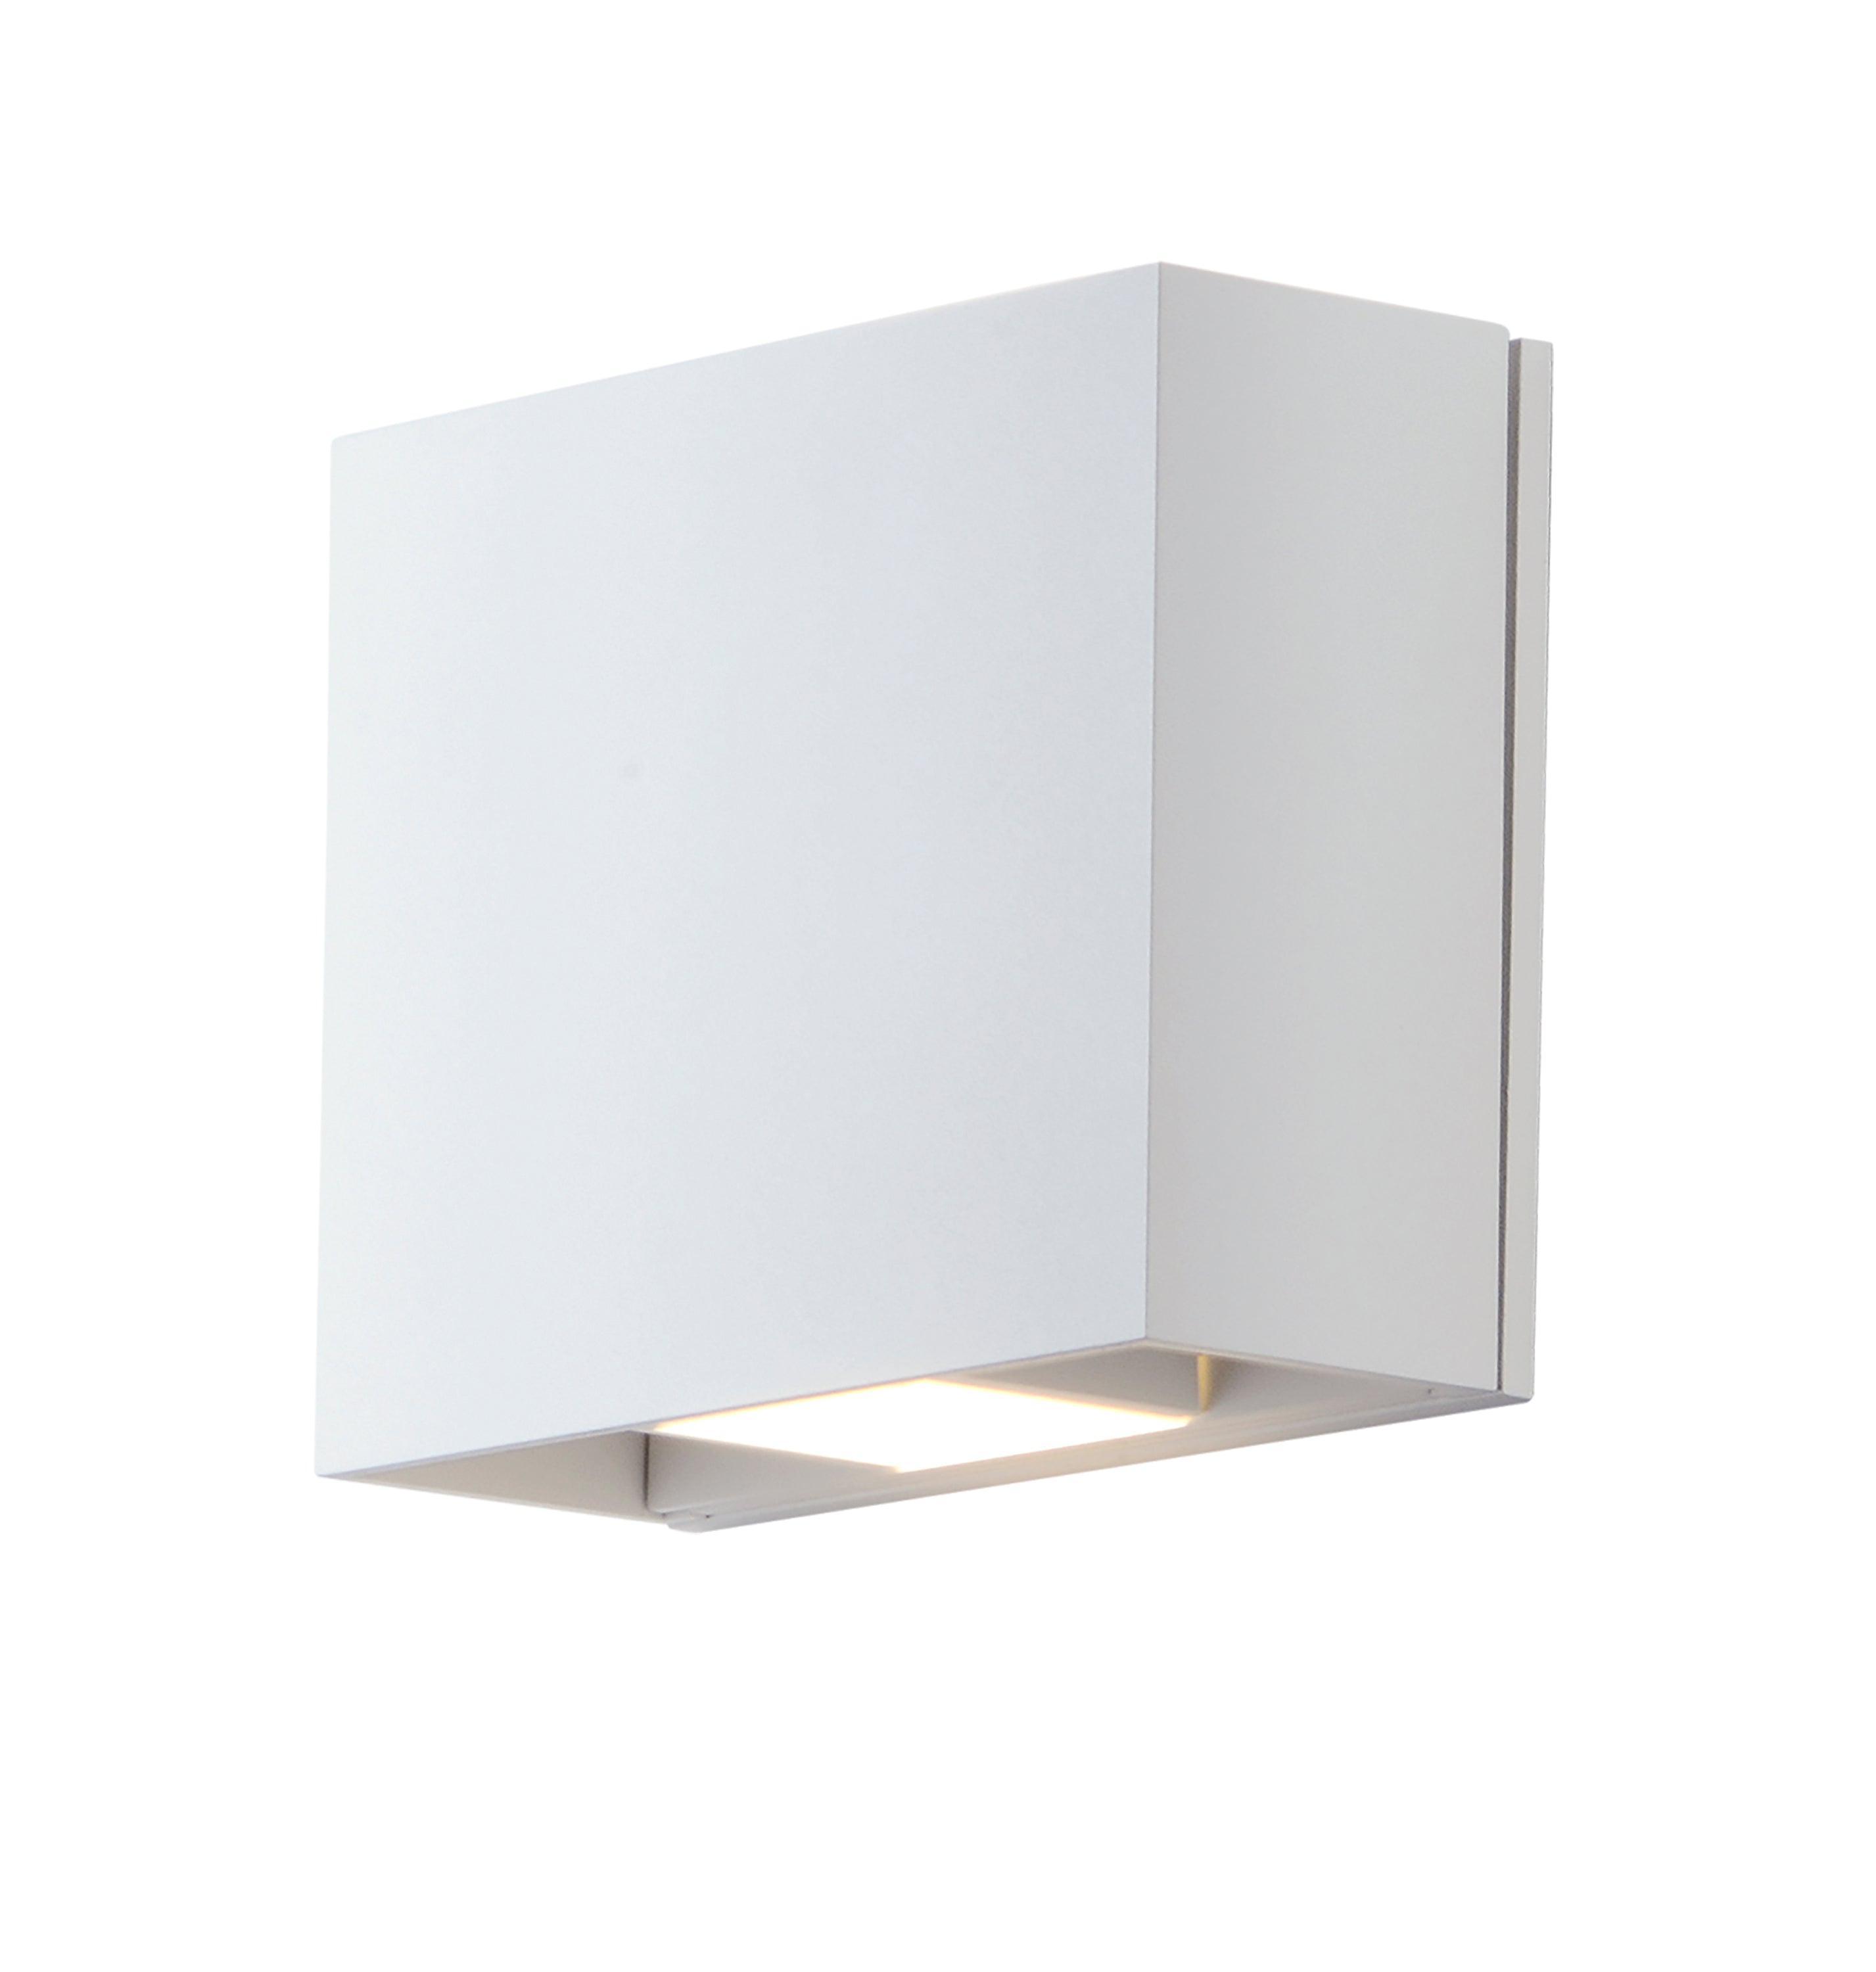 Alumilux Cube-Wall Sconce Wall Light Fixtures ET2 x7x6 White 